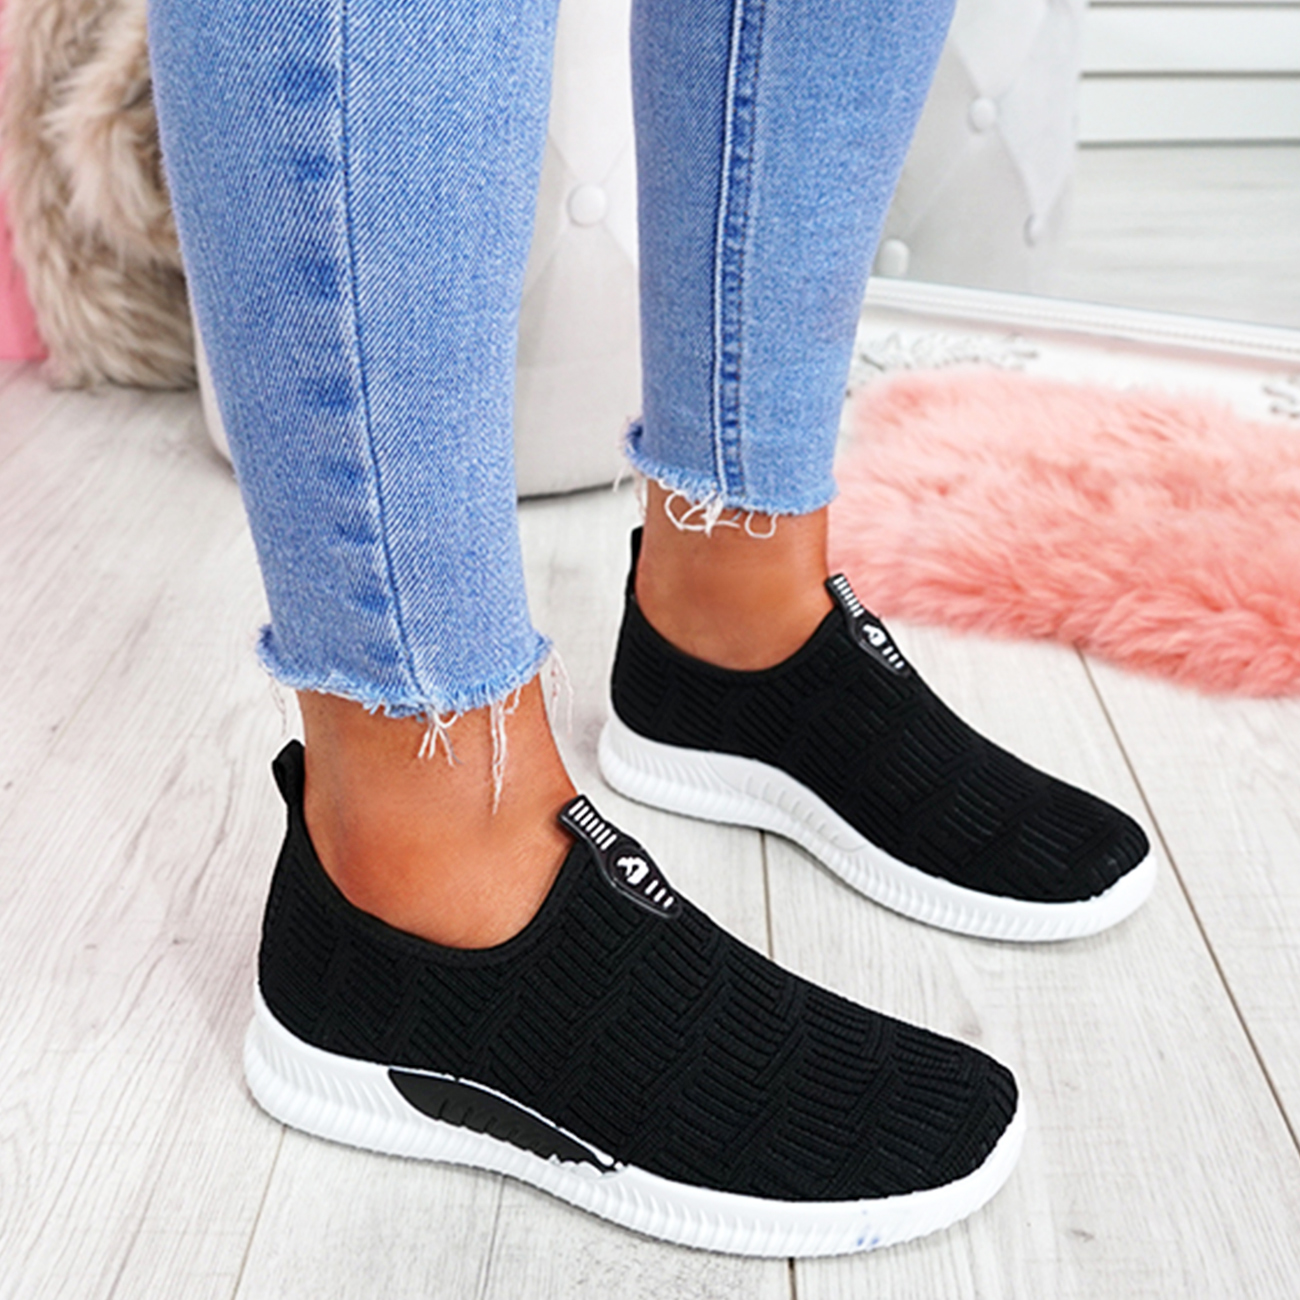 Womens Ladies Trainers Logo Sneakers Flat Sports Casual Slip On Pumps Shoes Size